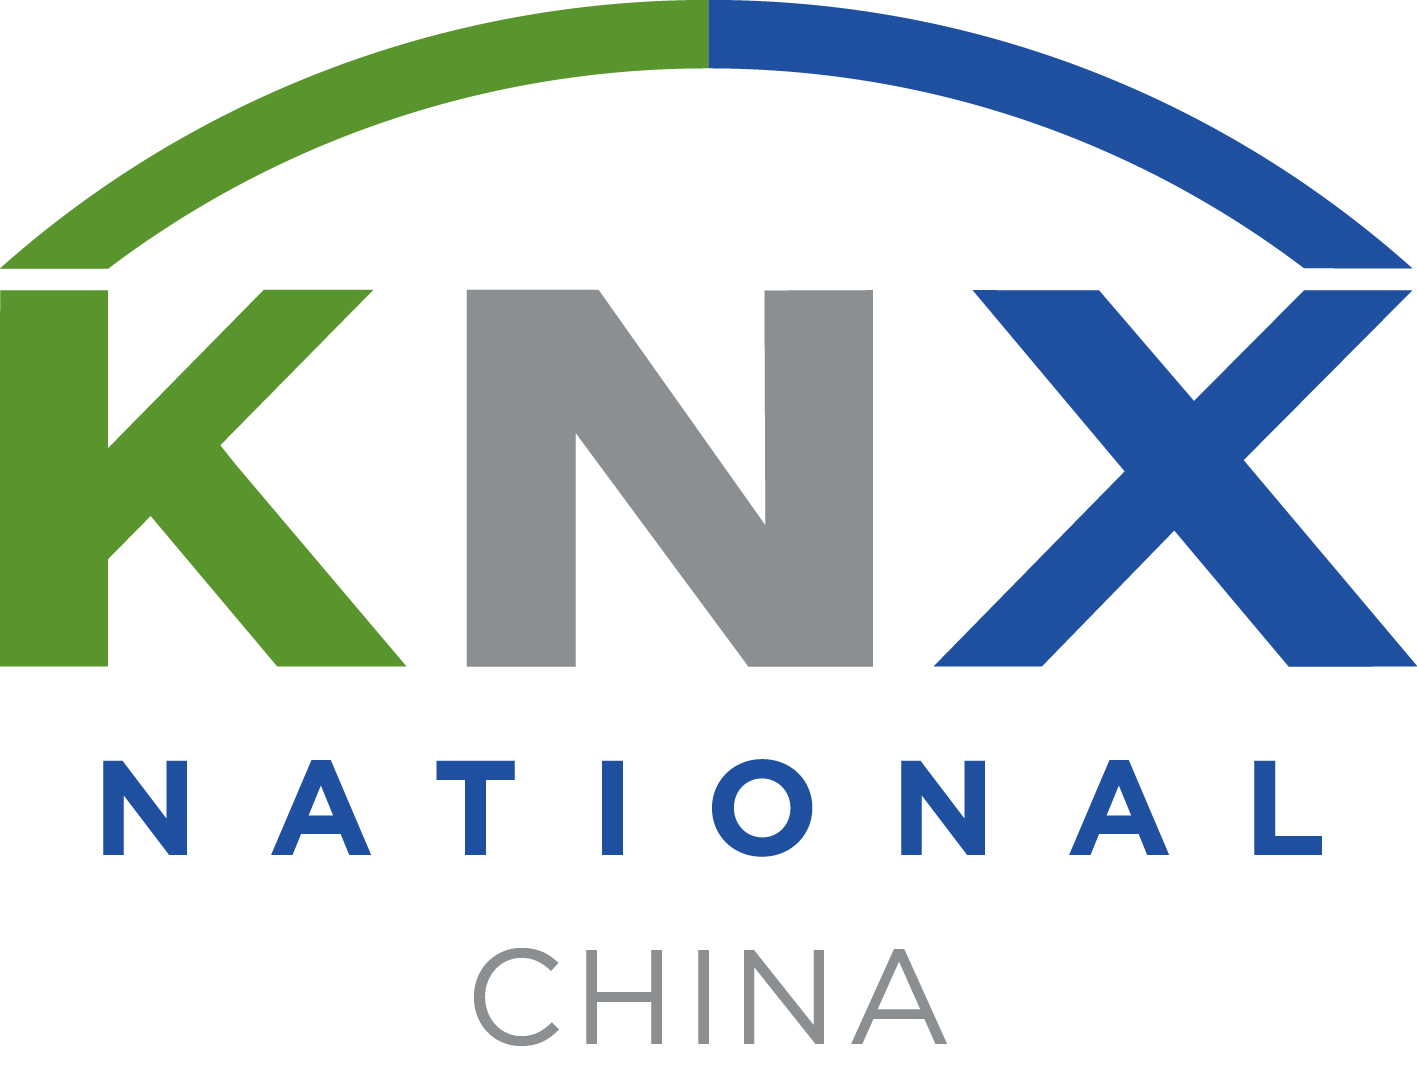 https://www.knx.org/knx-en/for-professionals/index.php